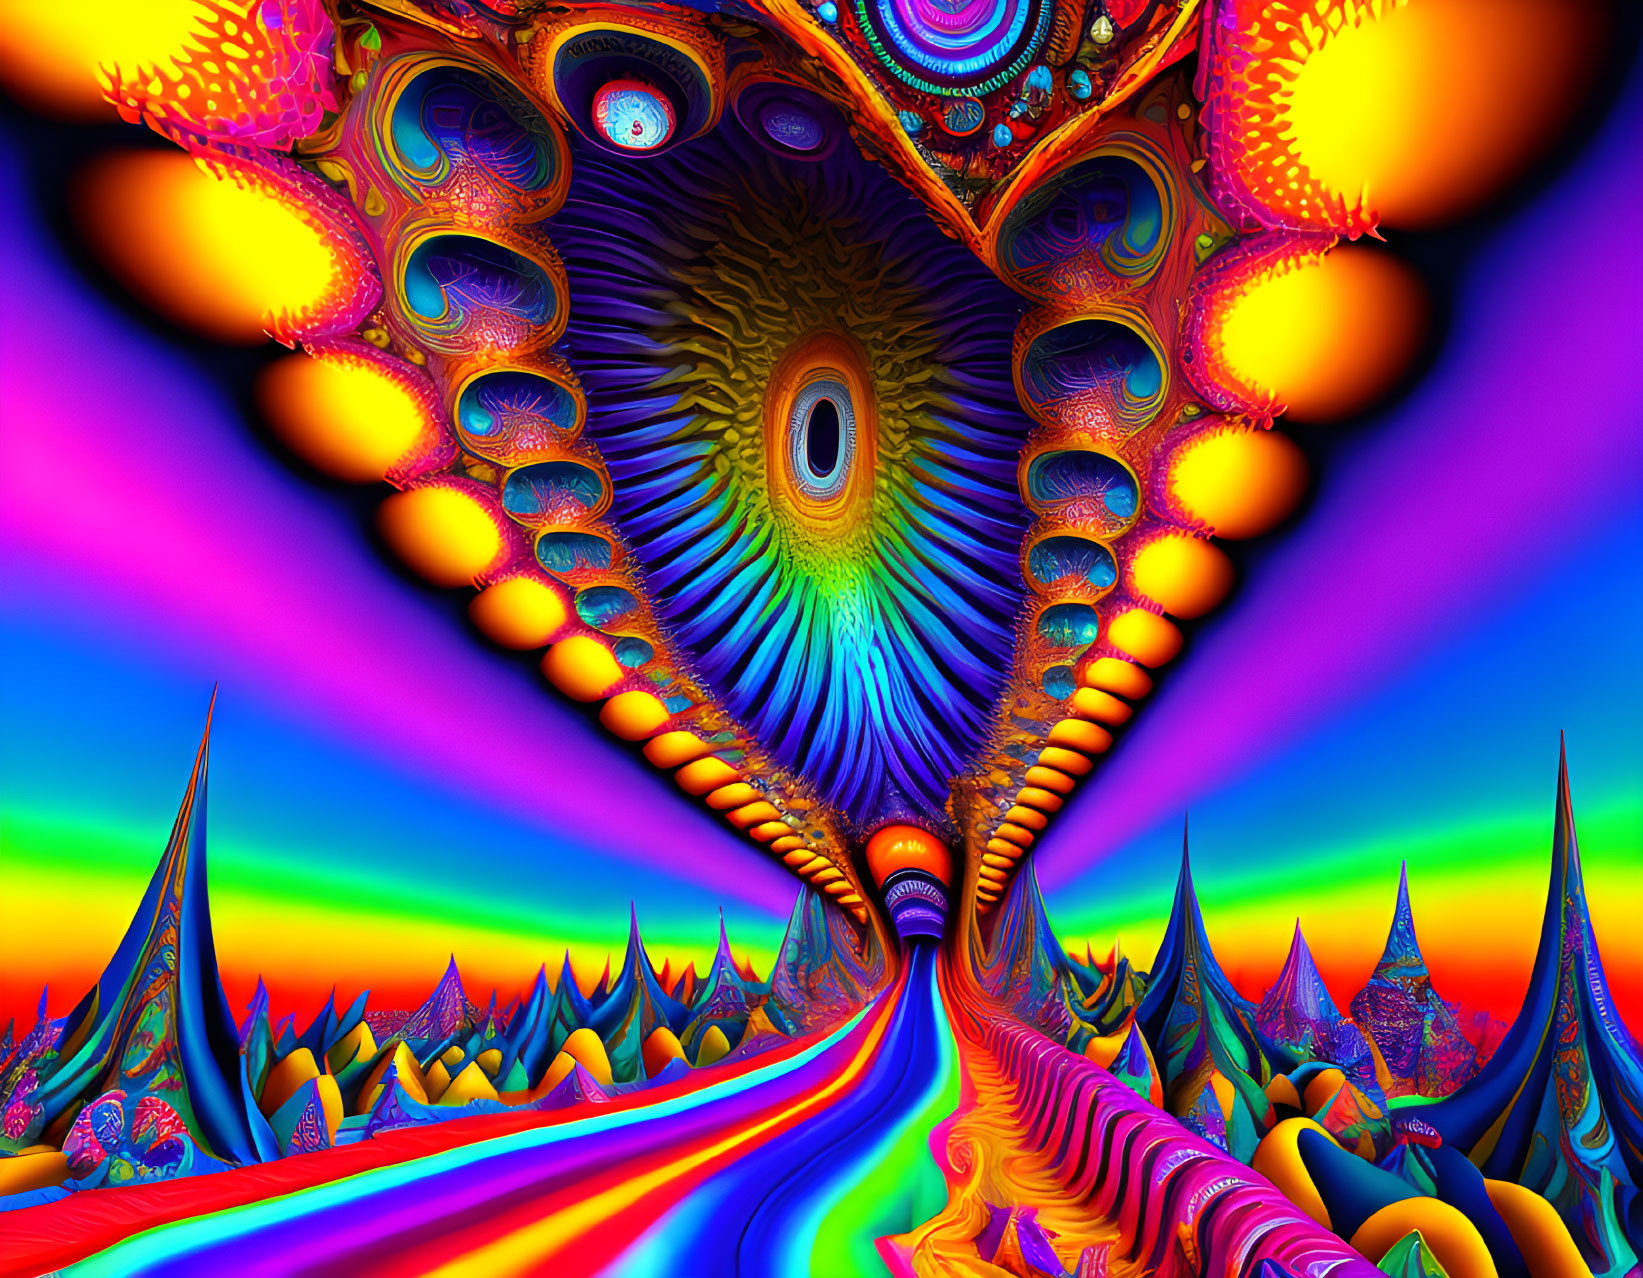 Colorful Psychedelic Artwork with Eye Motif & Intricate Patterns